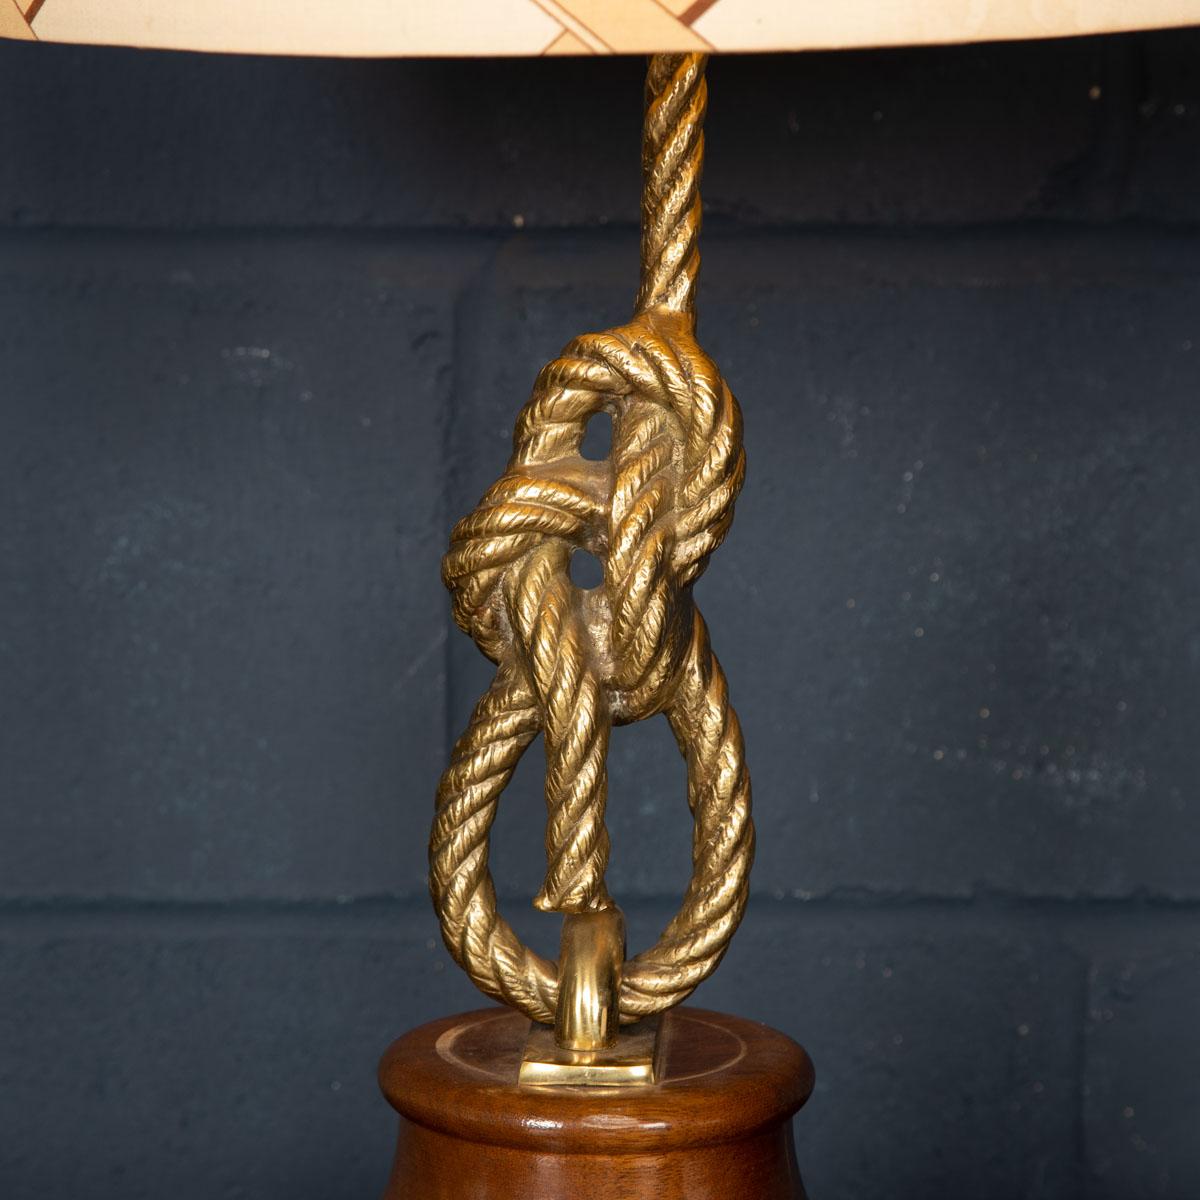 20th Century Large Table Lamp with Original Shade Attributable to Gucci, c.1980 For Sale 13